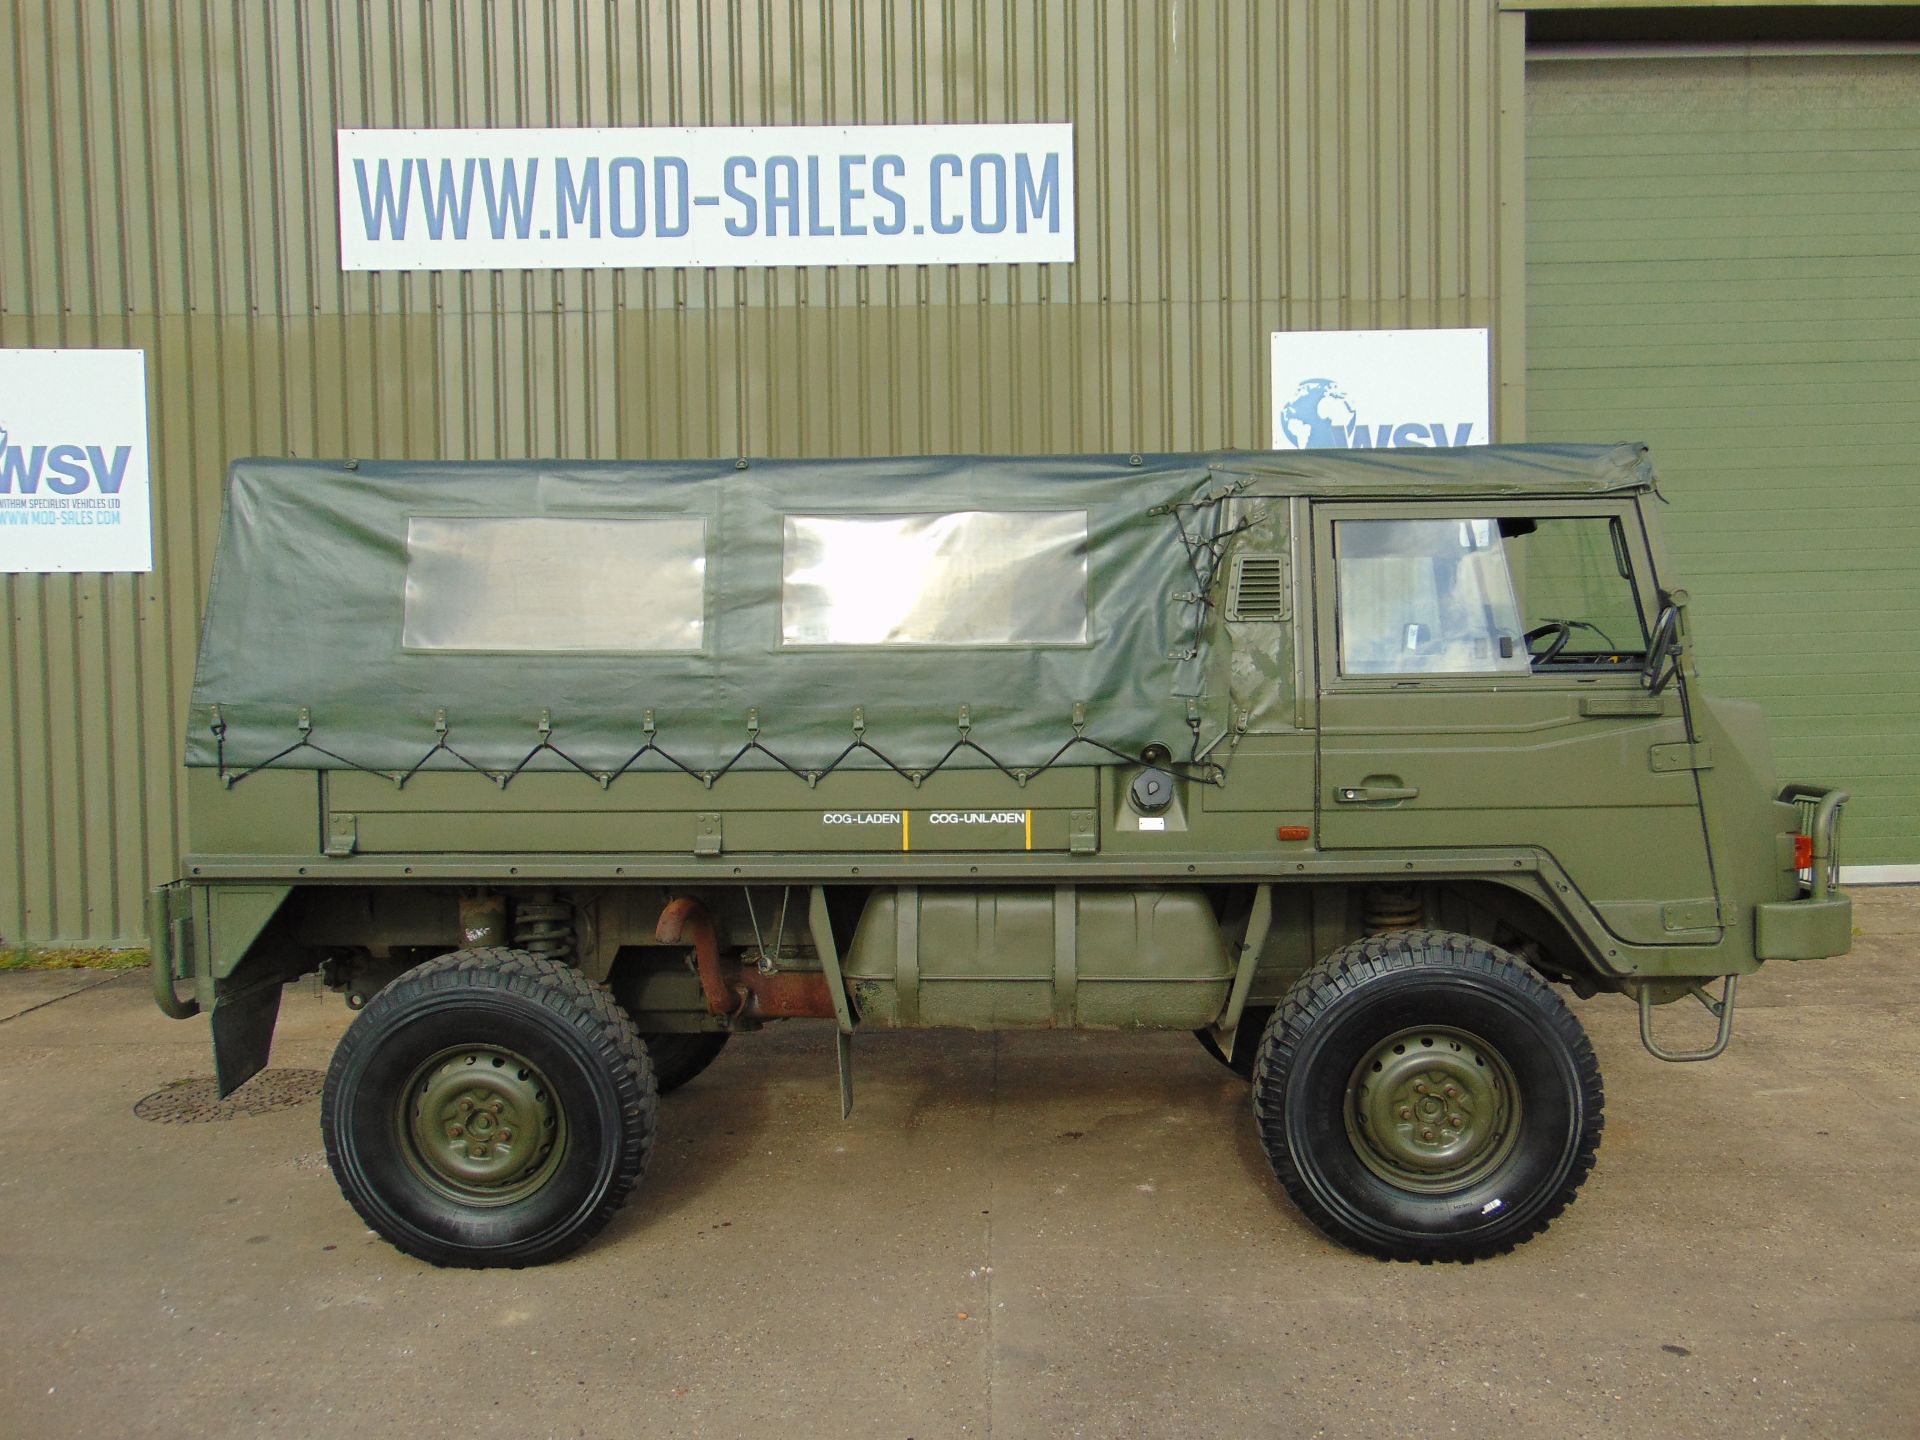 Pinzgauer 716 RHD soft top - only 7235 recorded miles! - Image 7 of 61